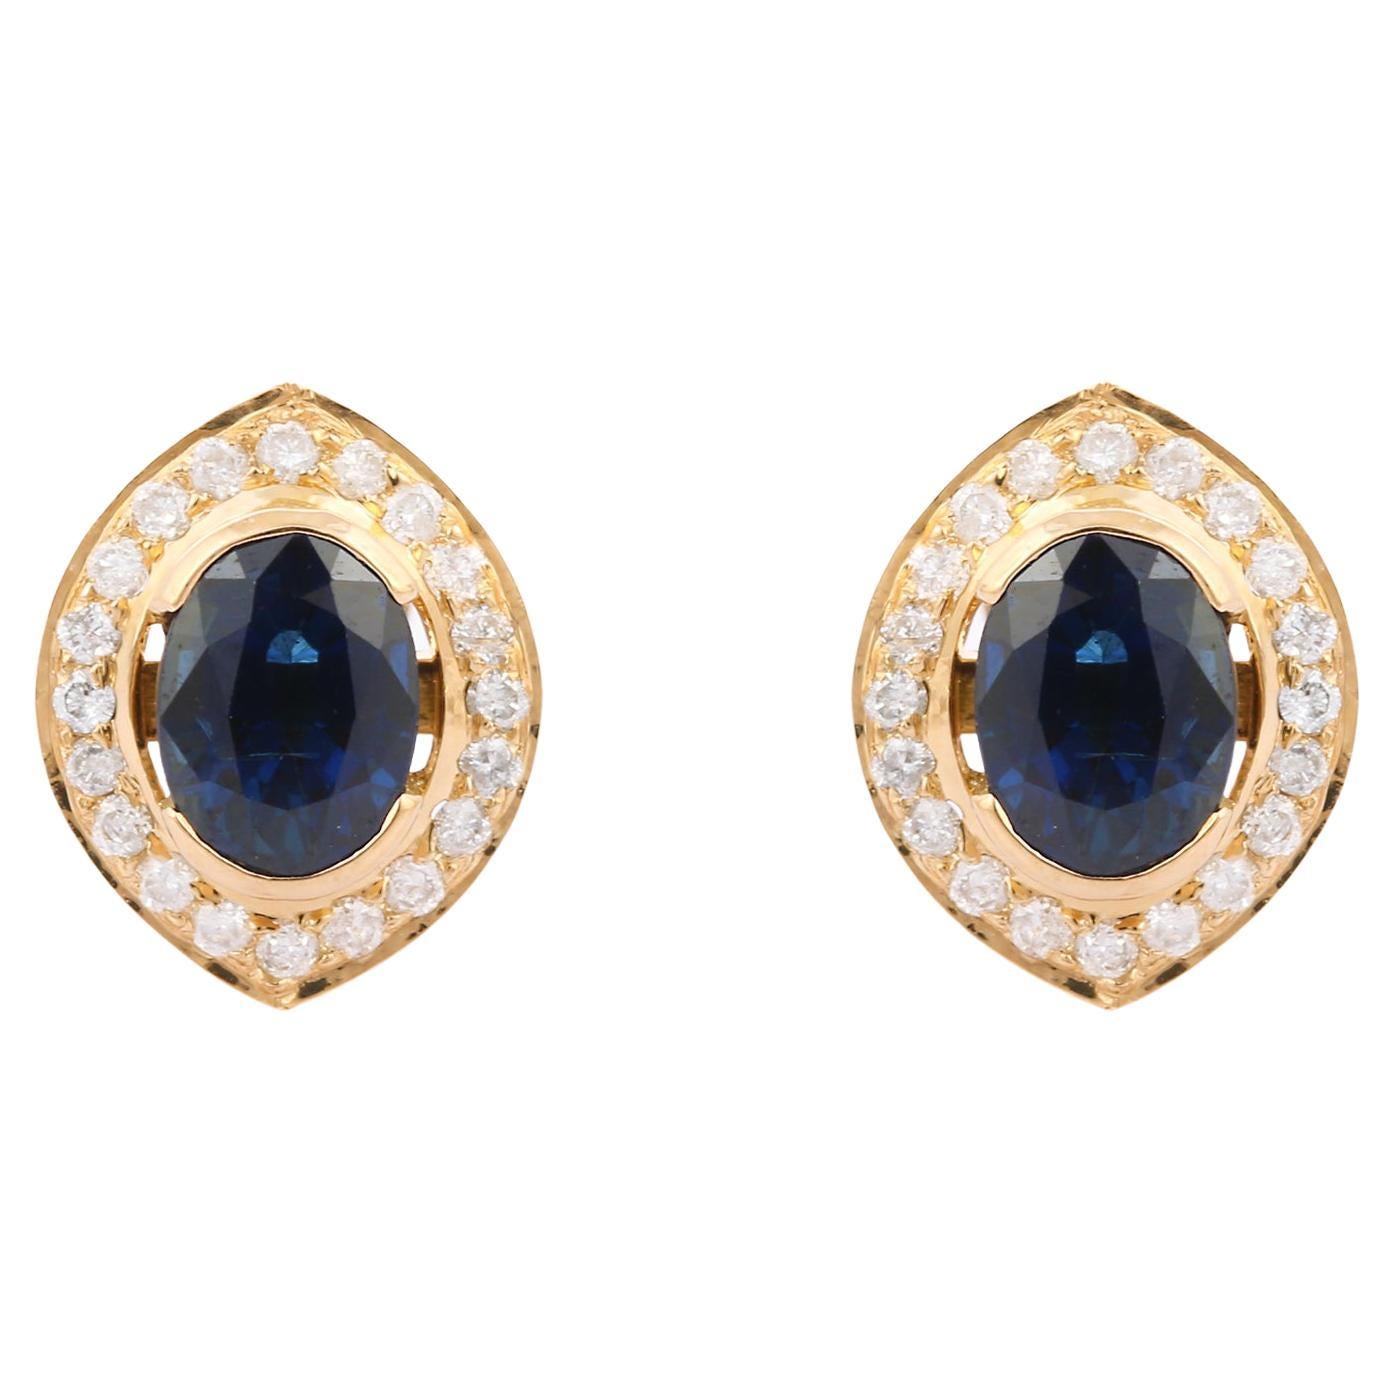 Genuine Blue Sapphire and Diamond Halo Stud Earrings in 18K Yellow Gold